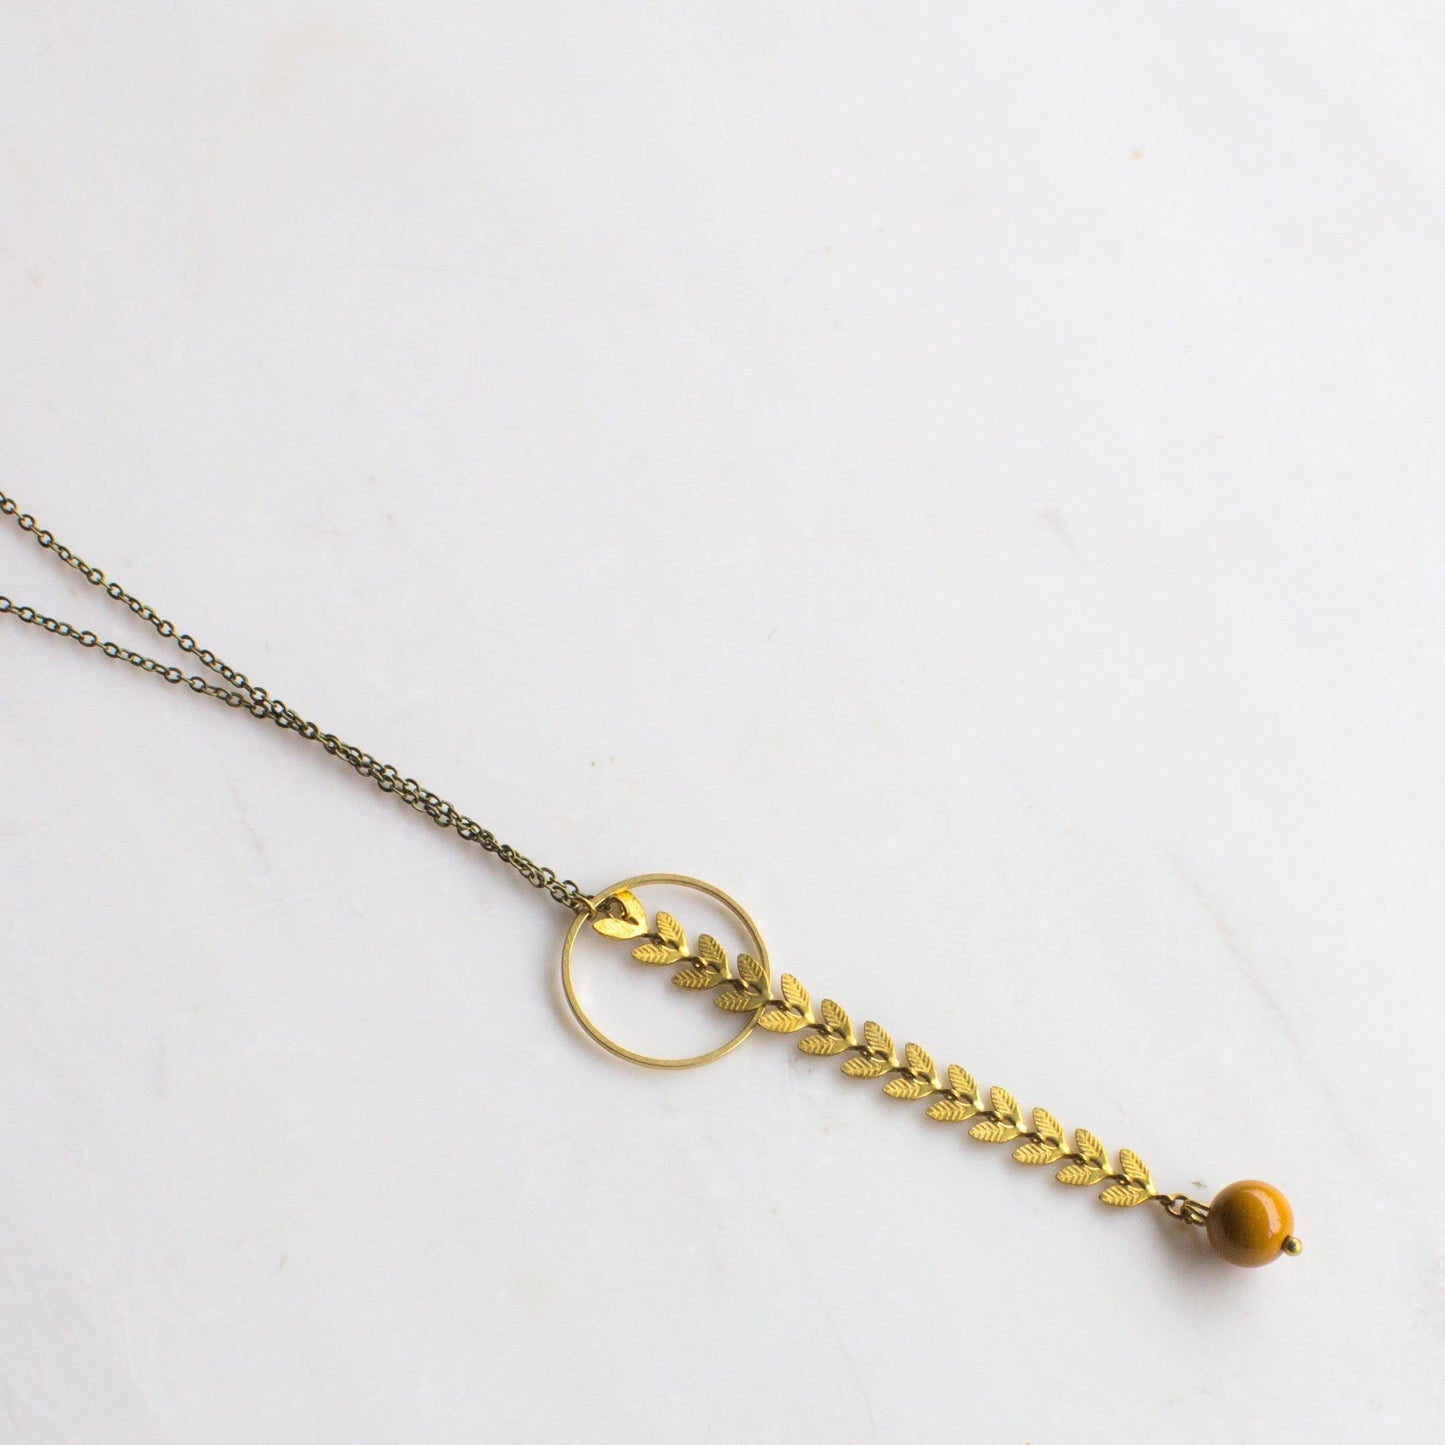 Gold Lariat Necklace with bead drop, long y necklace, gold leaf lariat necklace, long gold and yellow necklace